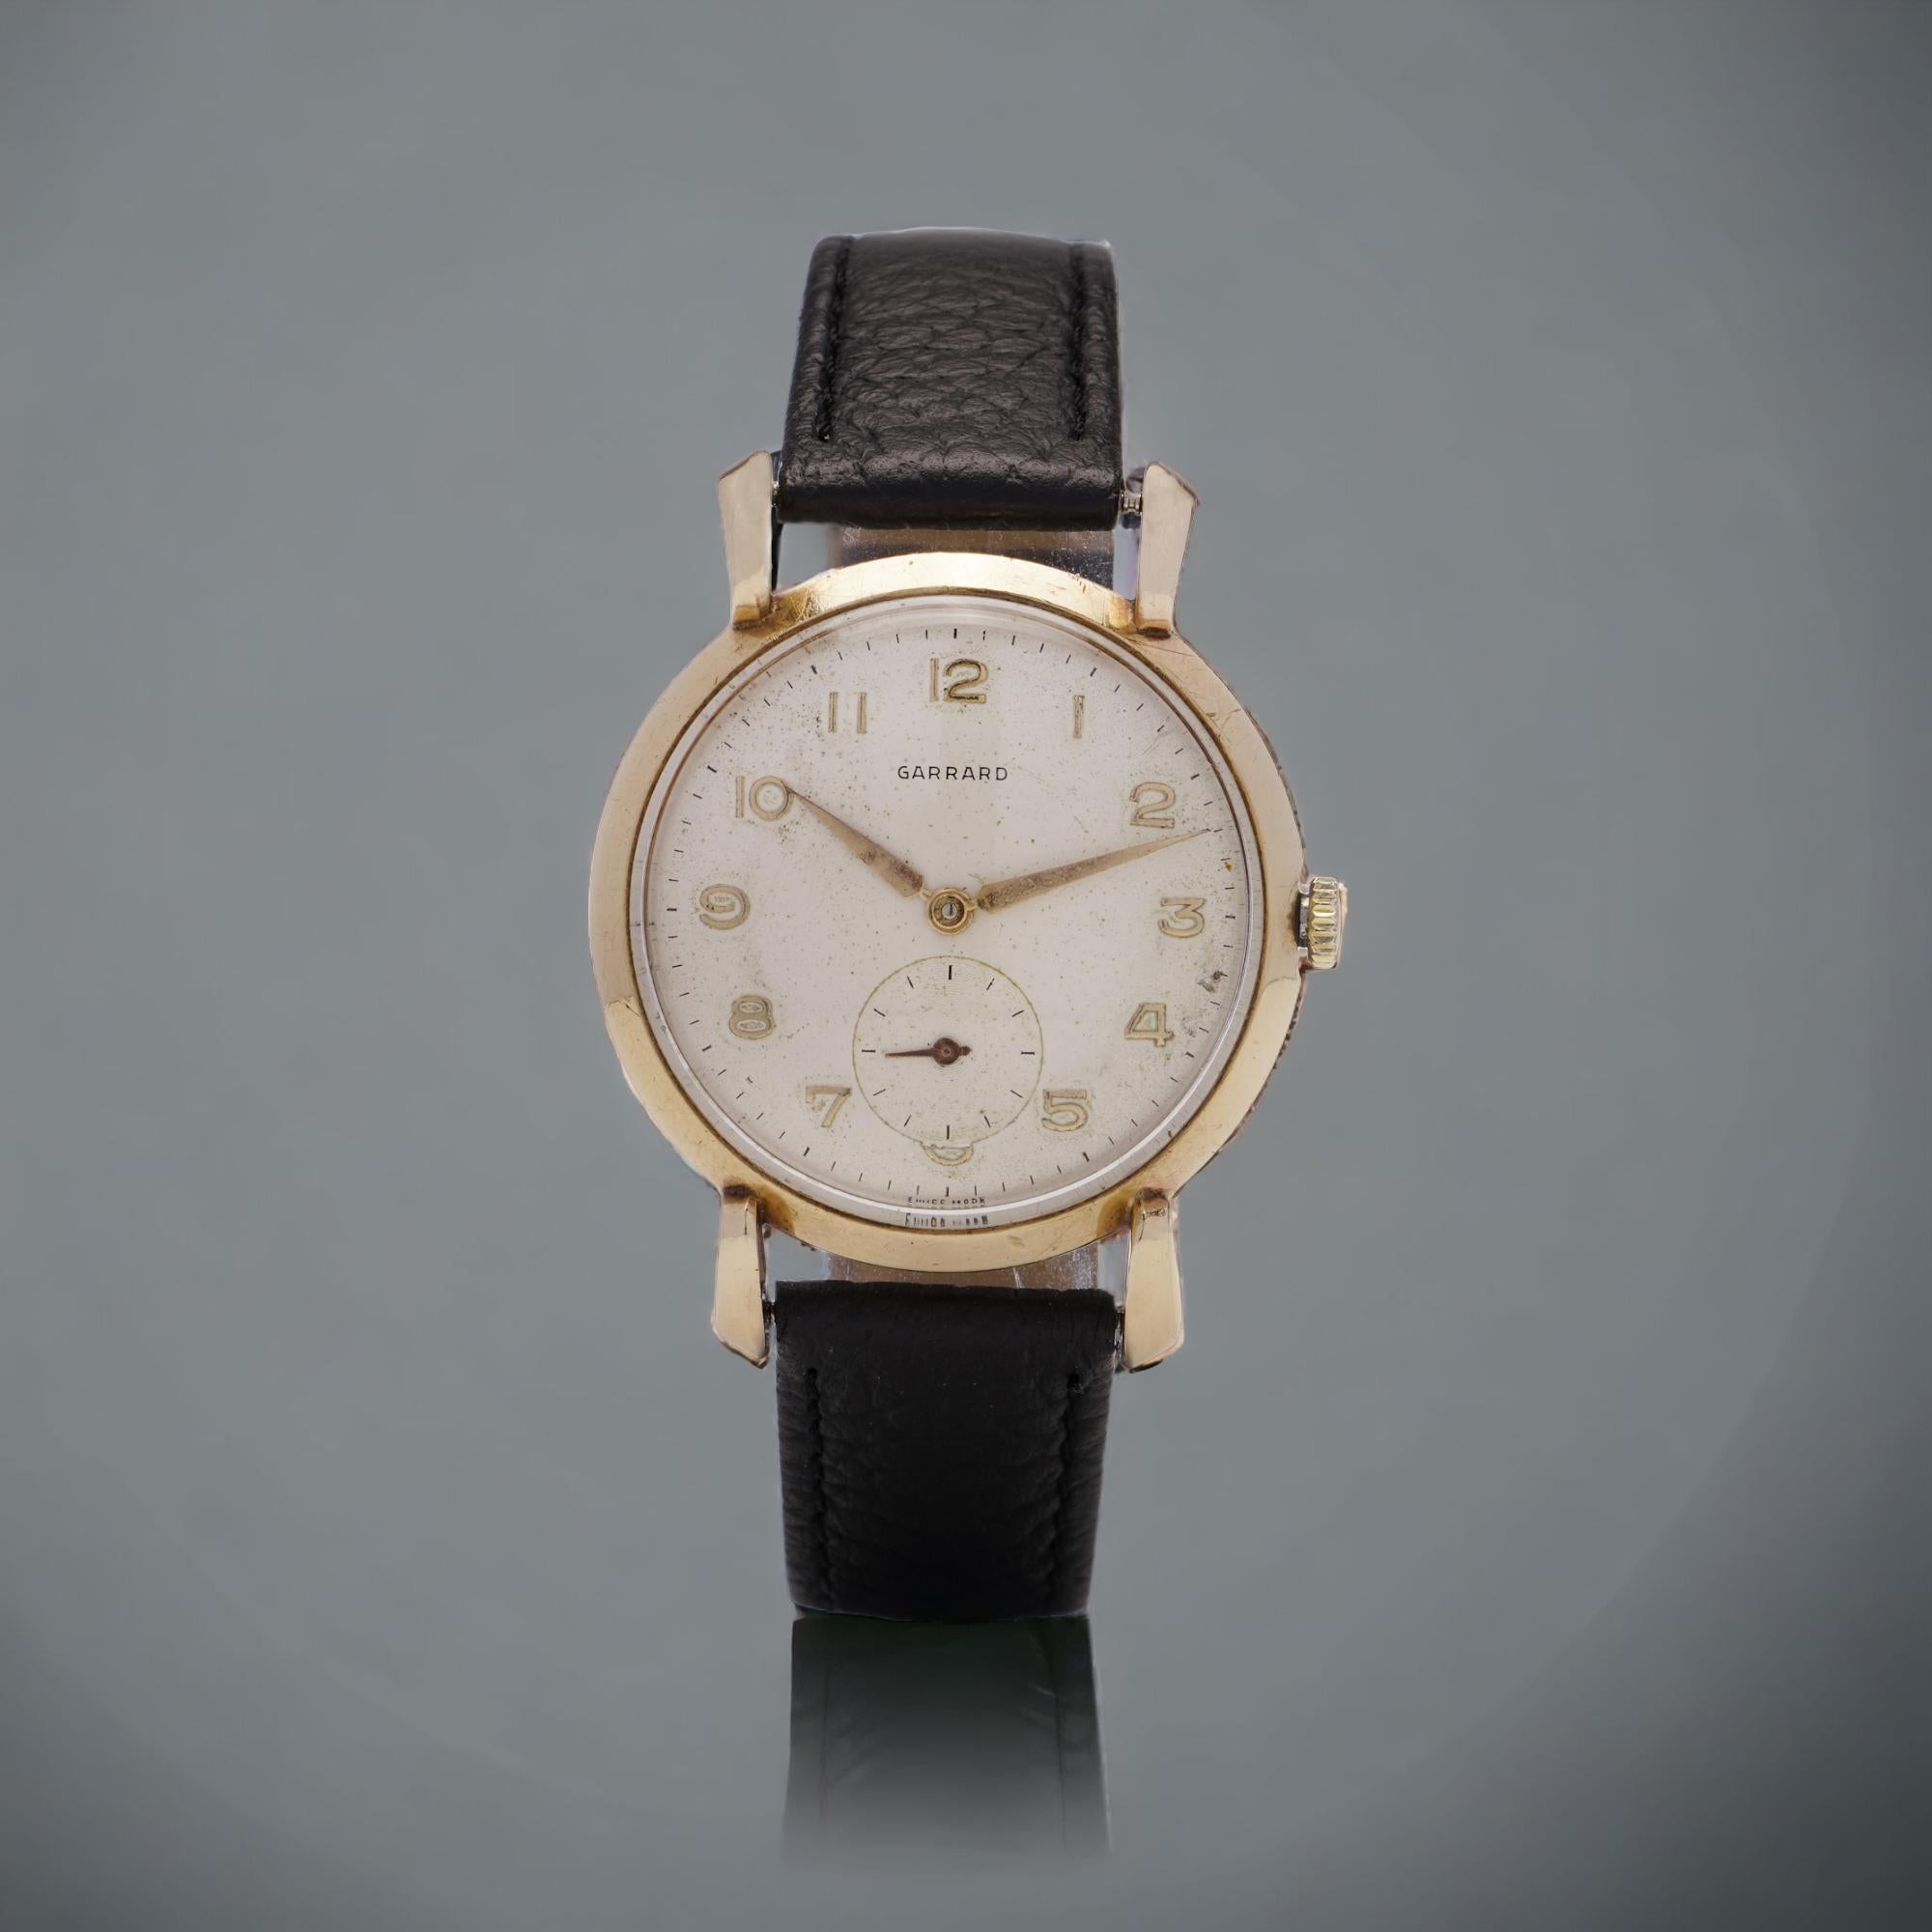 Vintage Garrard 9kt. gold men's wristwatch. 
There are hallmarks inside the case back for London, 1957 
The dial is signed with the original retailer’s name of Garrard.

Garrard & Co. is one of the world's most venerable jewellers and silversmiths.